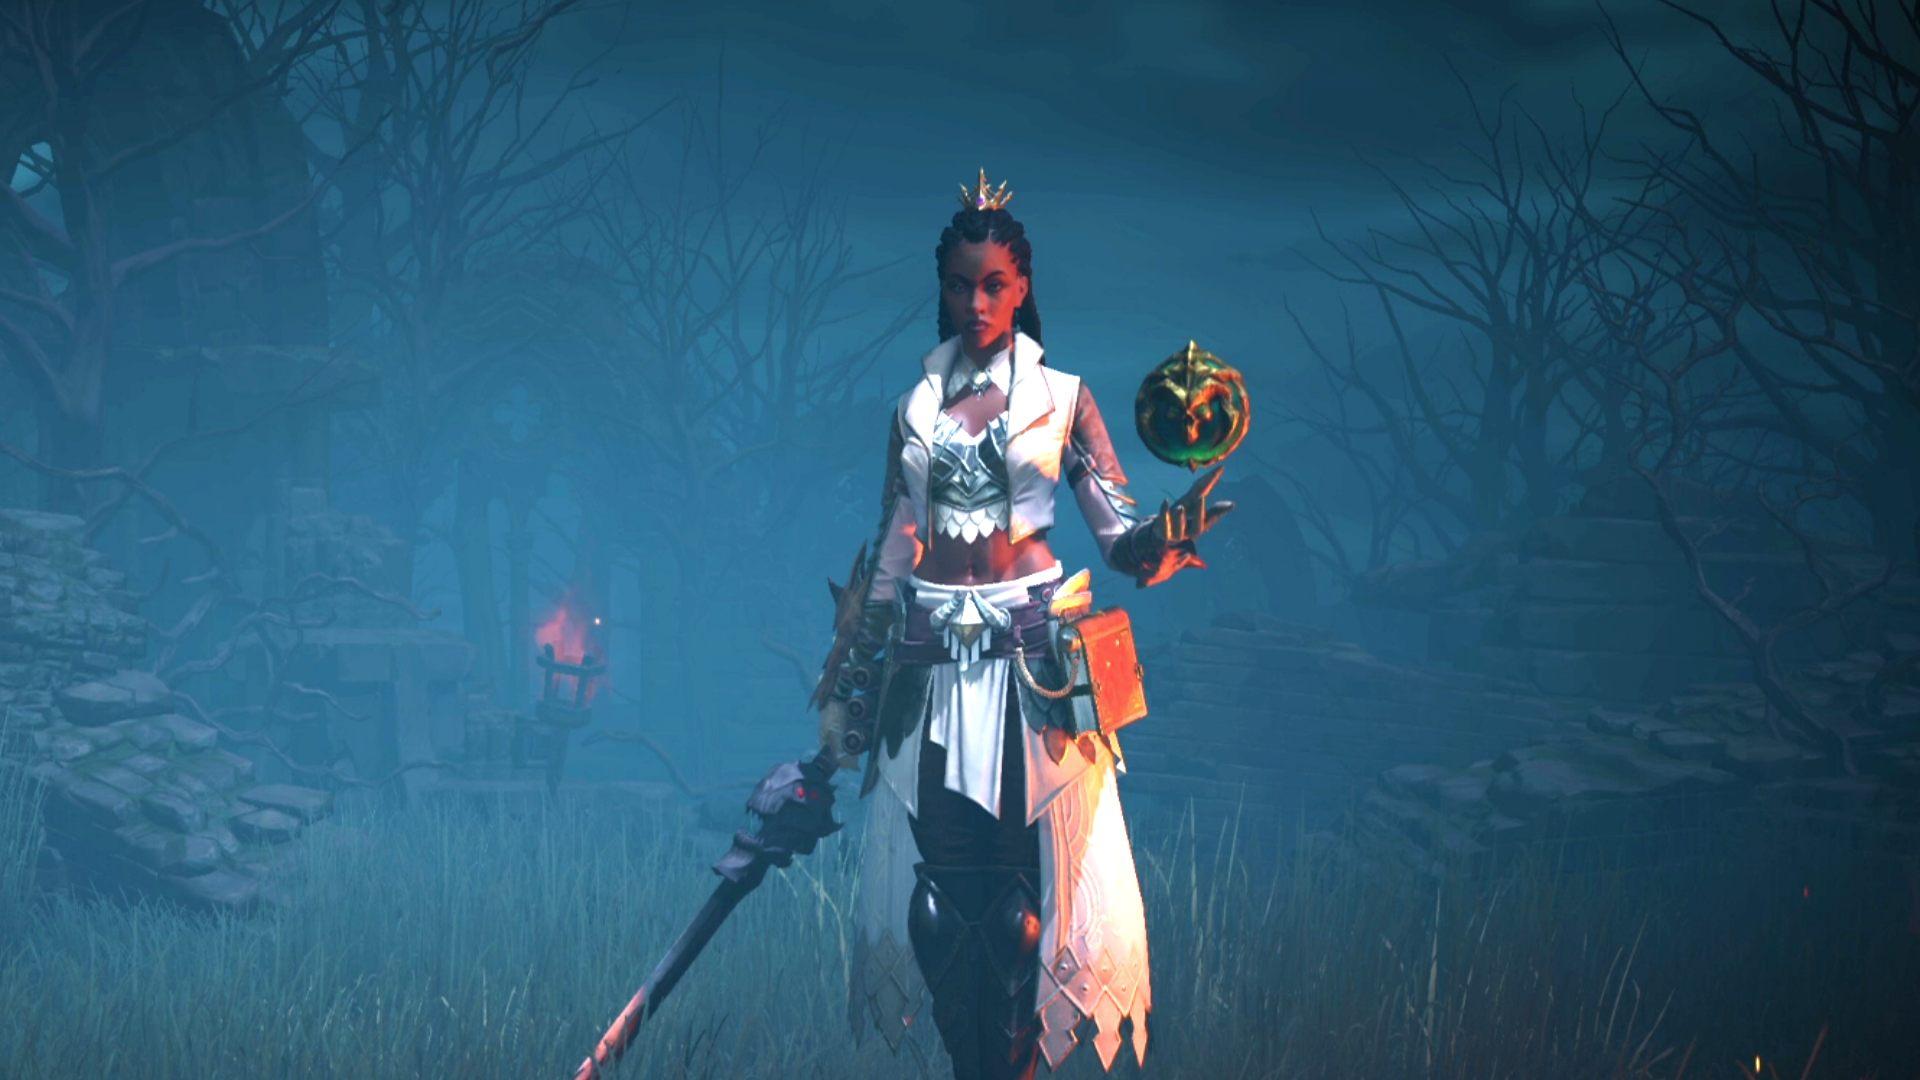 Best Diablo Immortal builds: a female Wizard wearing endgame armour, while holding a sword and floating an orb with her other hand.